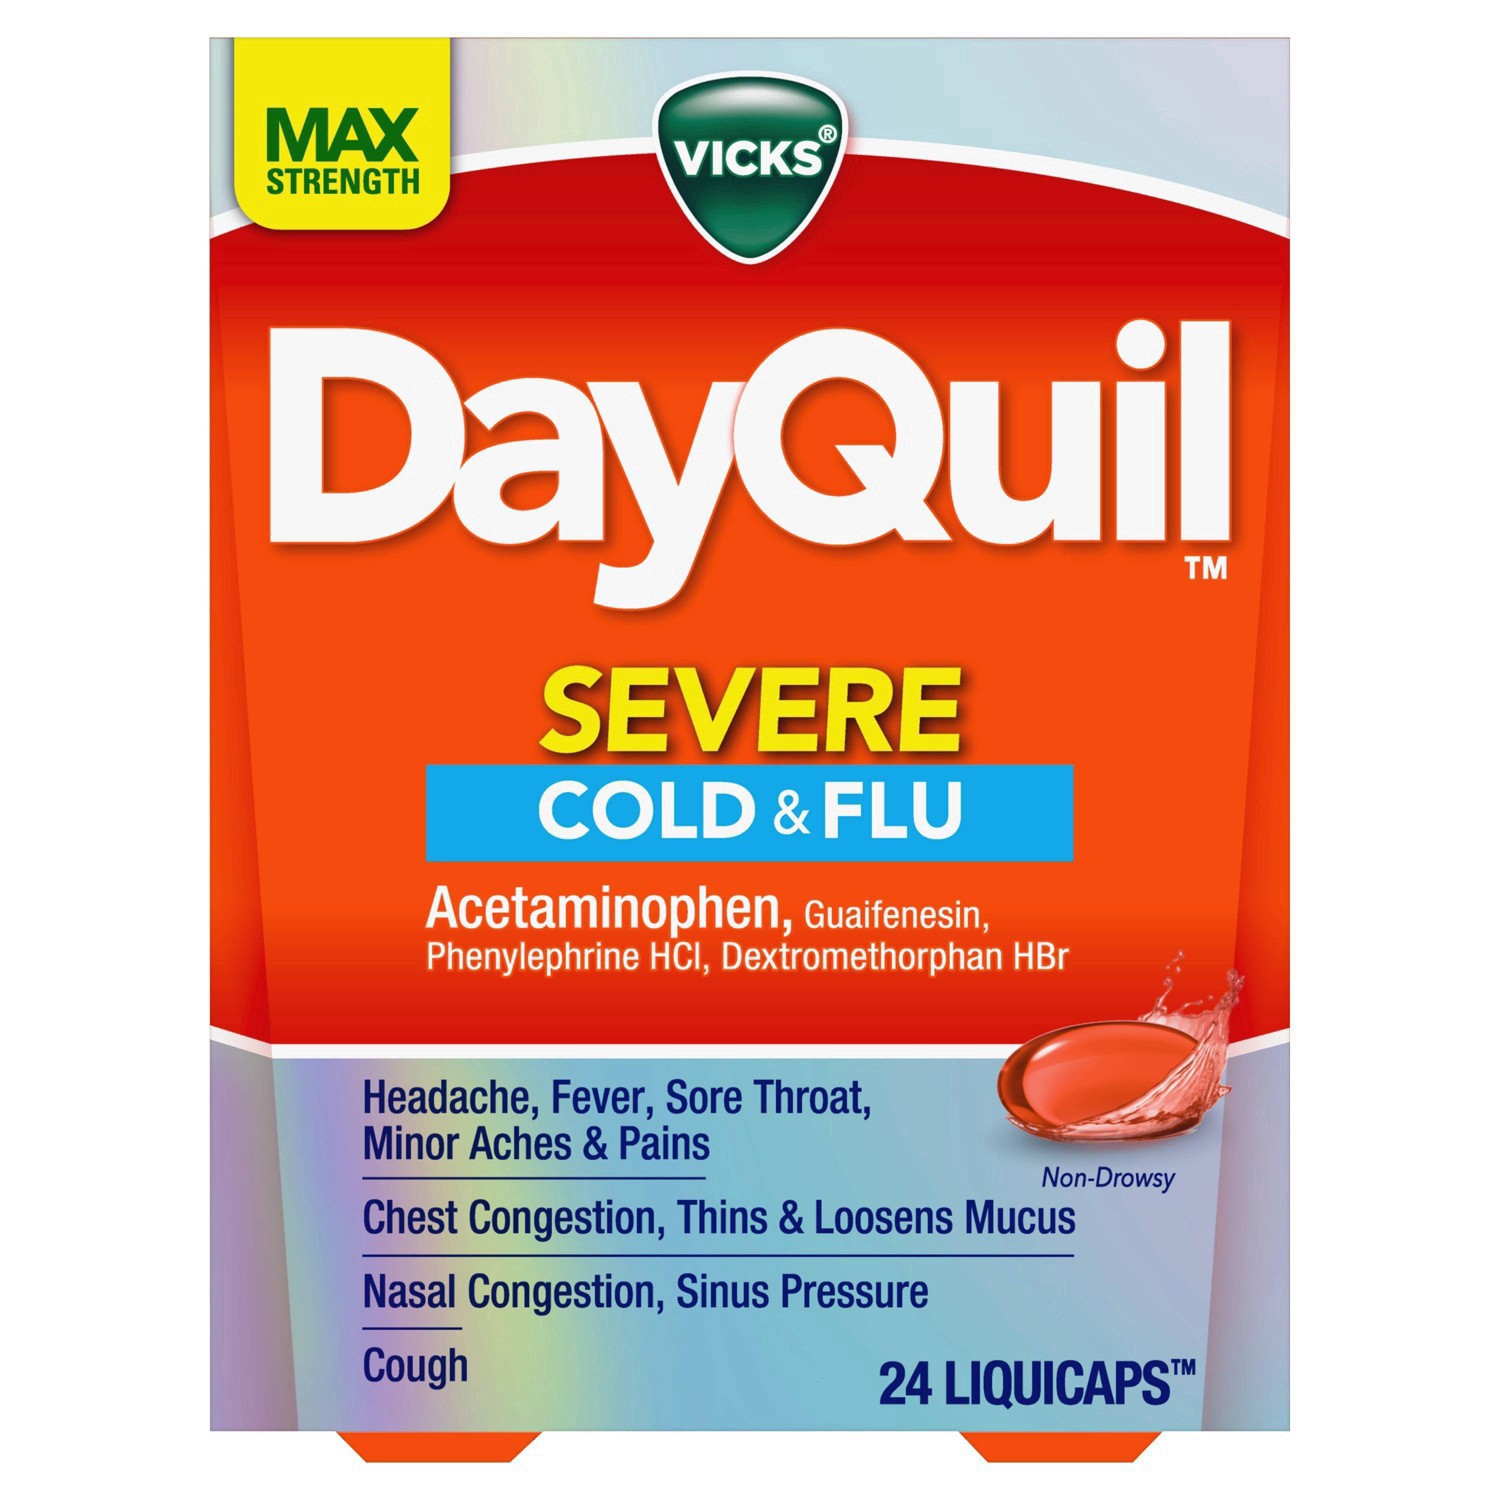 slide 38 of 46, Vicks DayQuil SEVERE Cold & Flu Medicine, Maximum Strength 9-Symptom Non-Drowsy Daytime Relief for Headache, Fever, Sore Throat, Minor Aches and Pains, Chest Congestion, Stuffy Nose, Nasal Congestion, Sinus Pressure, and Cough, 24 Liquicaps, 24 ct